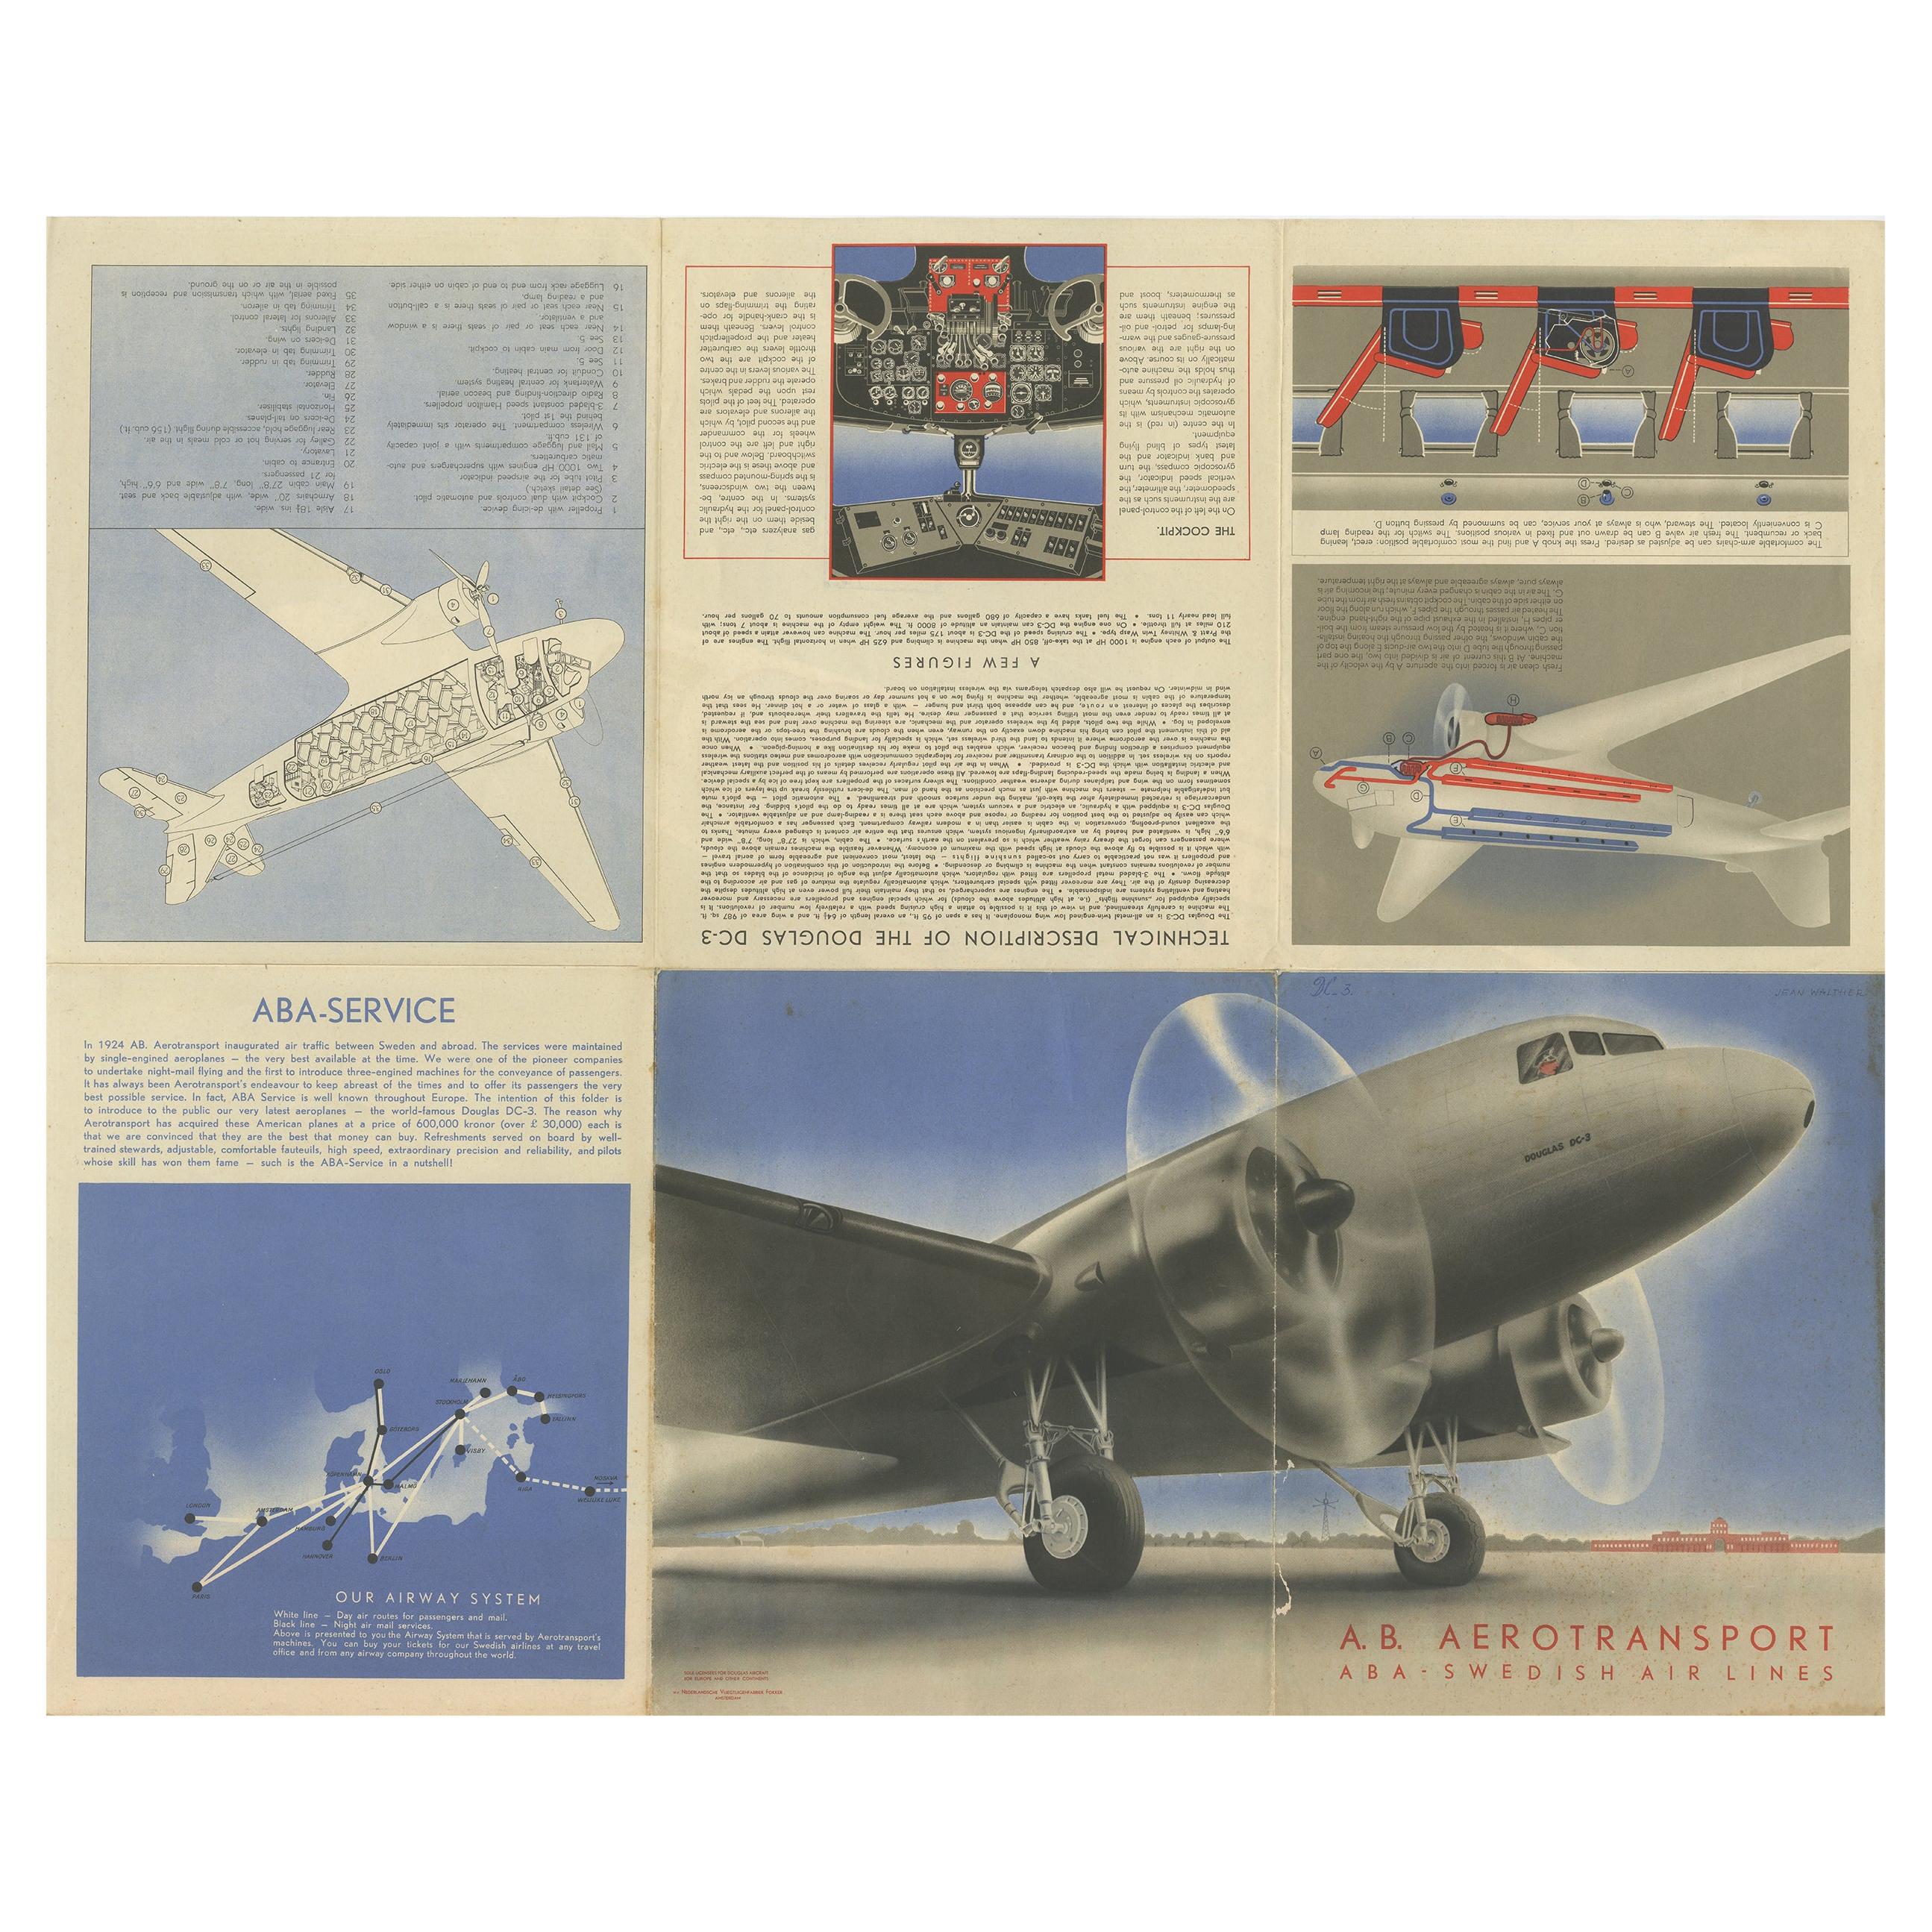 Original vintage poster / folder of the Douglas DC-3 A.B. Aerotransport Swedish Air Lines. It shows various illustrations of the Douglas Dc-3 and a detailed description (in English). First flown in 1935, the Douglas DC-3 became the most successful